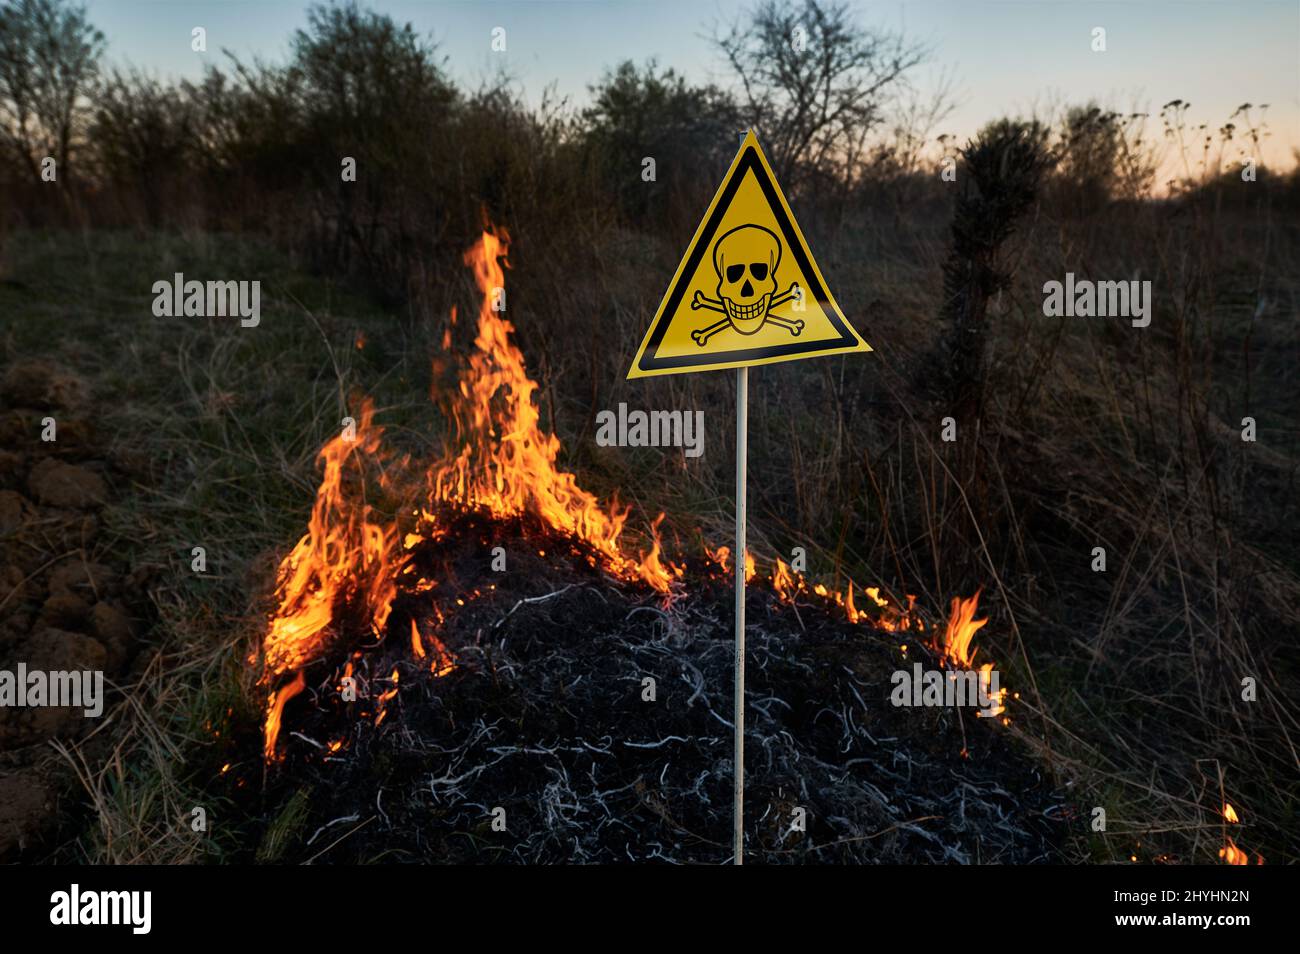 Burning dry grass and poison toxic sign. Yellow triangle with skull and crossbones sign warning about poisonous substances and danger in field with fire. Ecology, hazard, natural disaster concept. Stock Photo